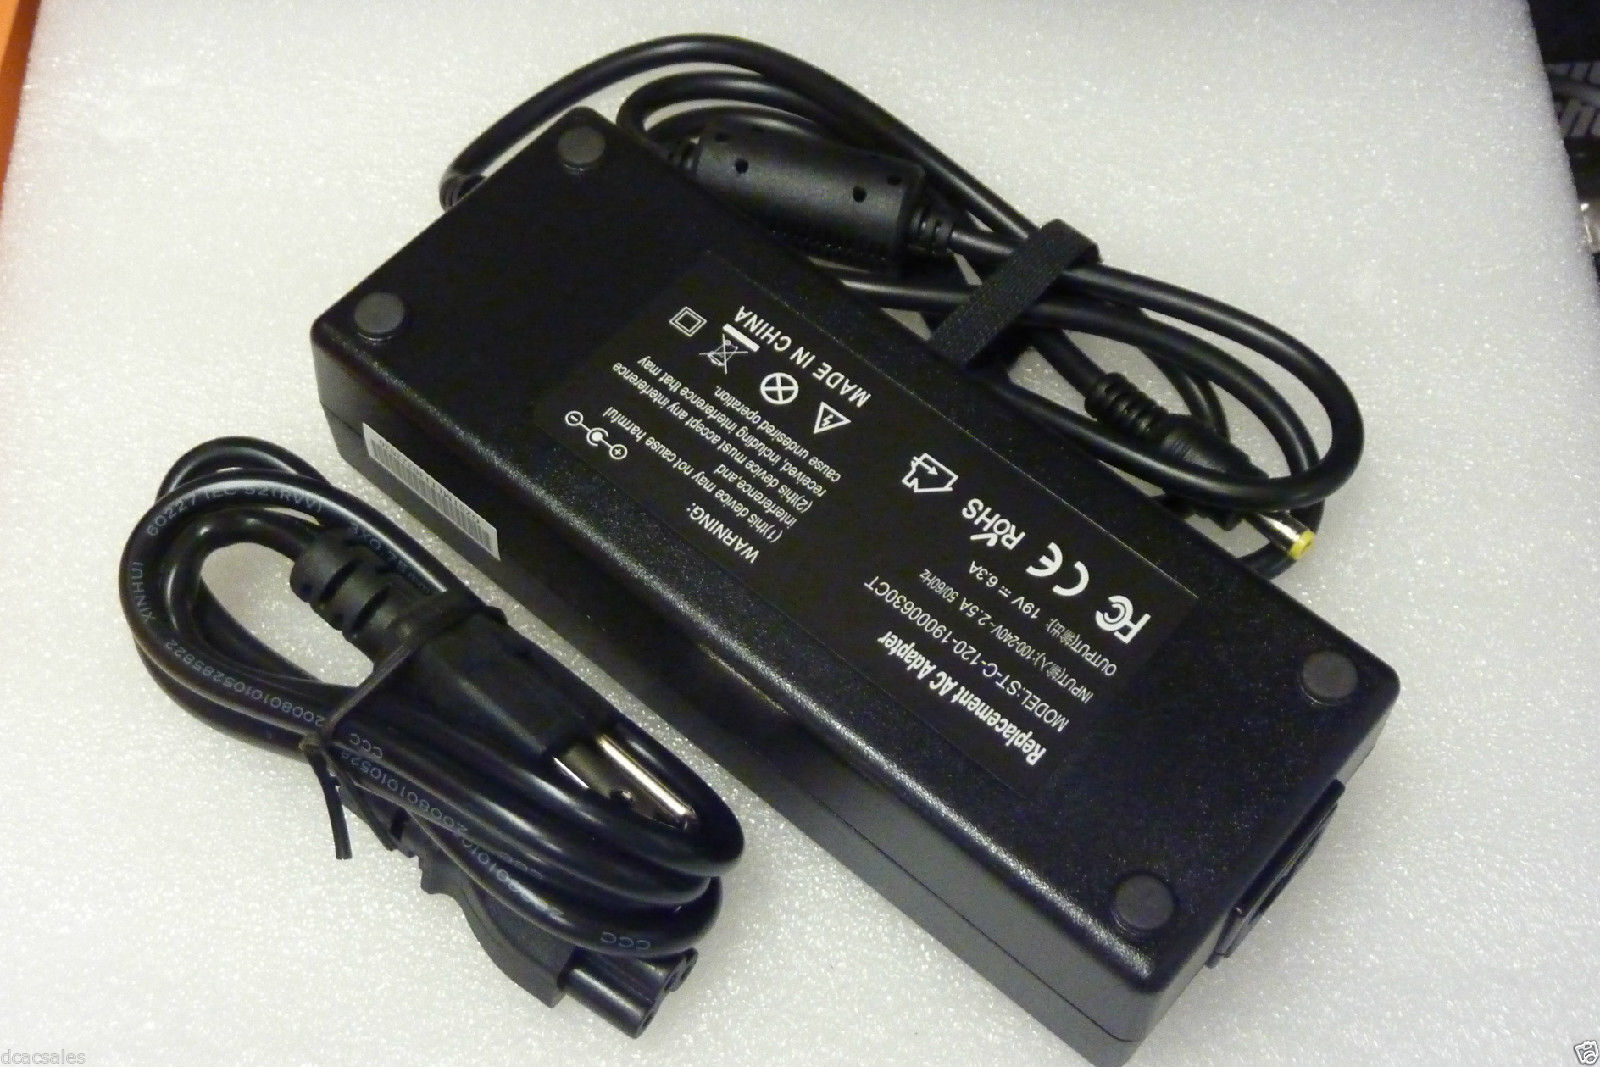 AC Adapter For ASUS FX504 FX504GE FX504GD Laptop 120W Charger Power Supply Cord